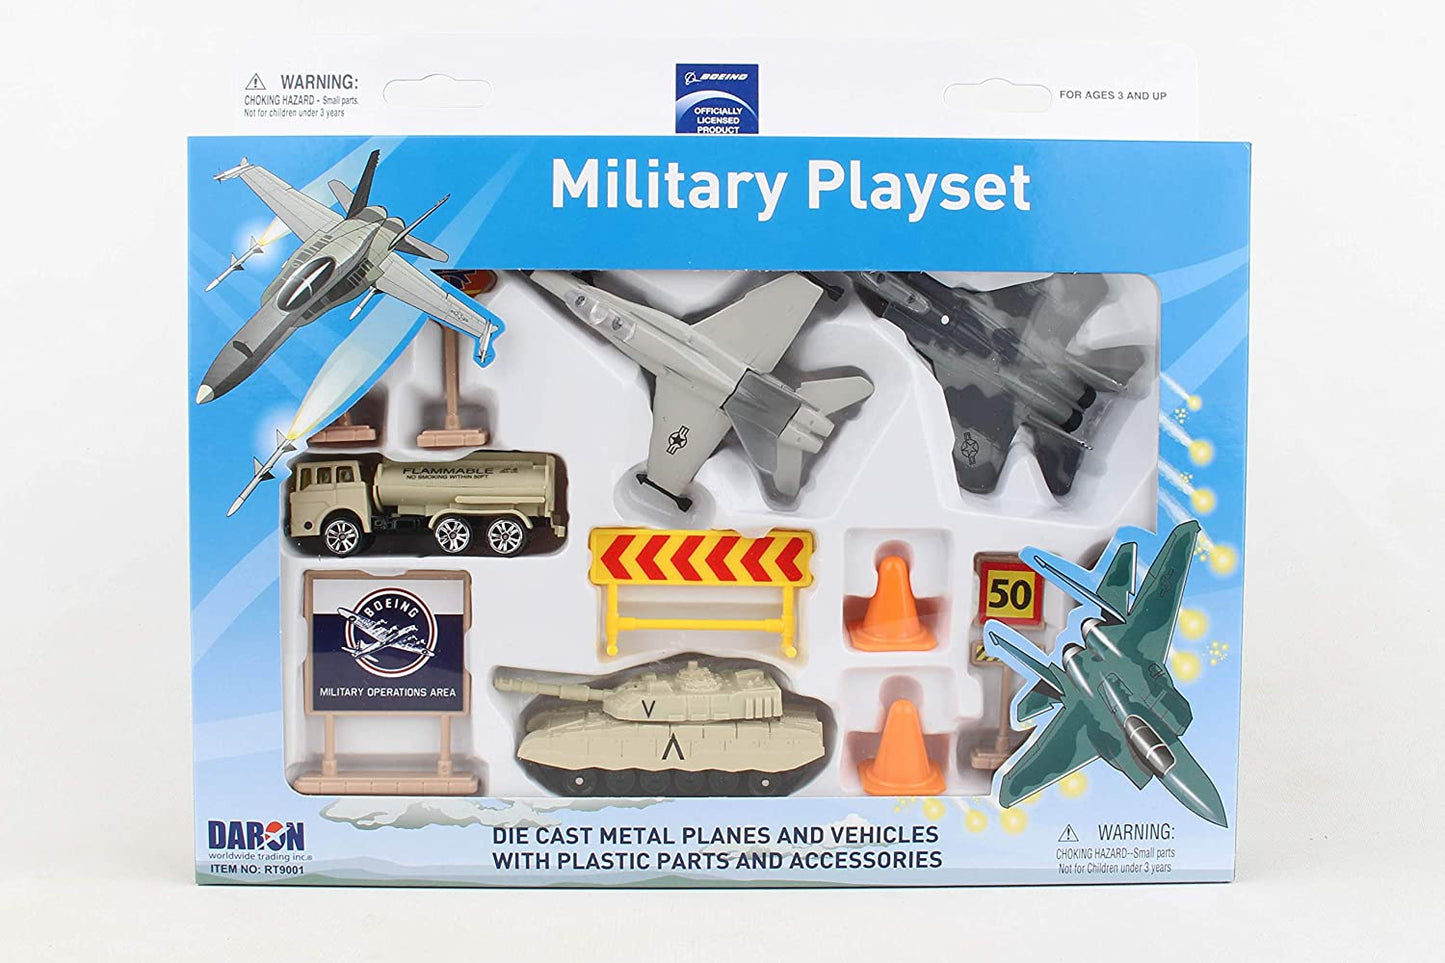 Boeing Military Kids Toy Playset Feature 2 Aircraft, Tank, Vehicle and Signs Accessories